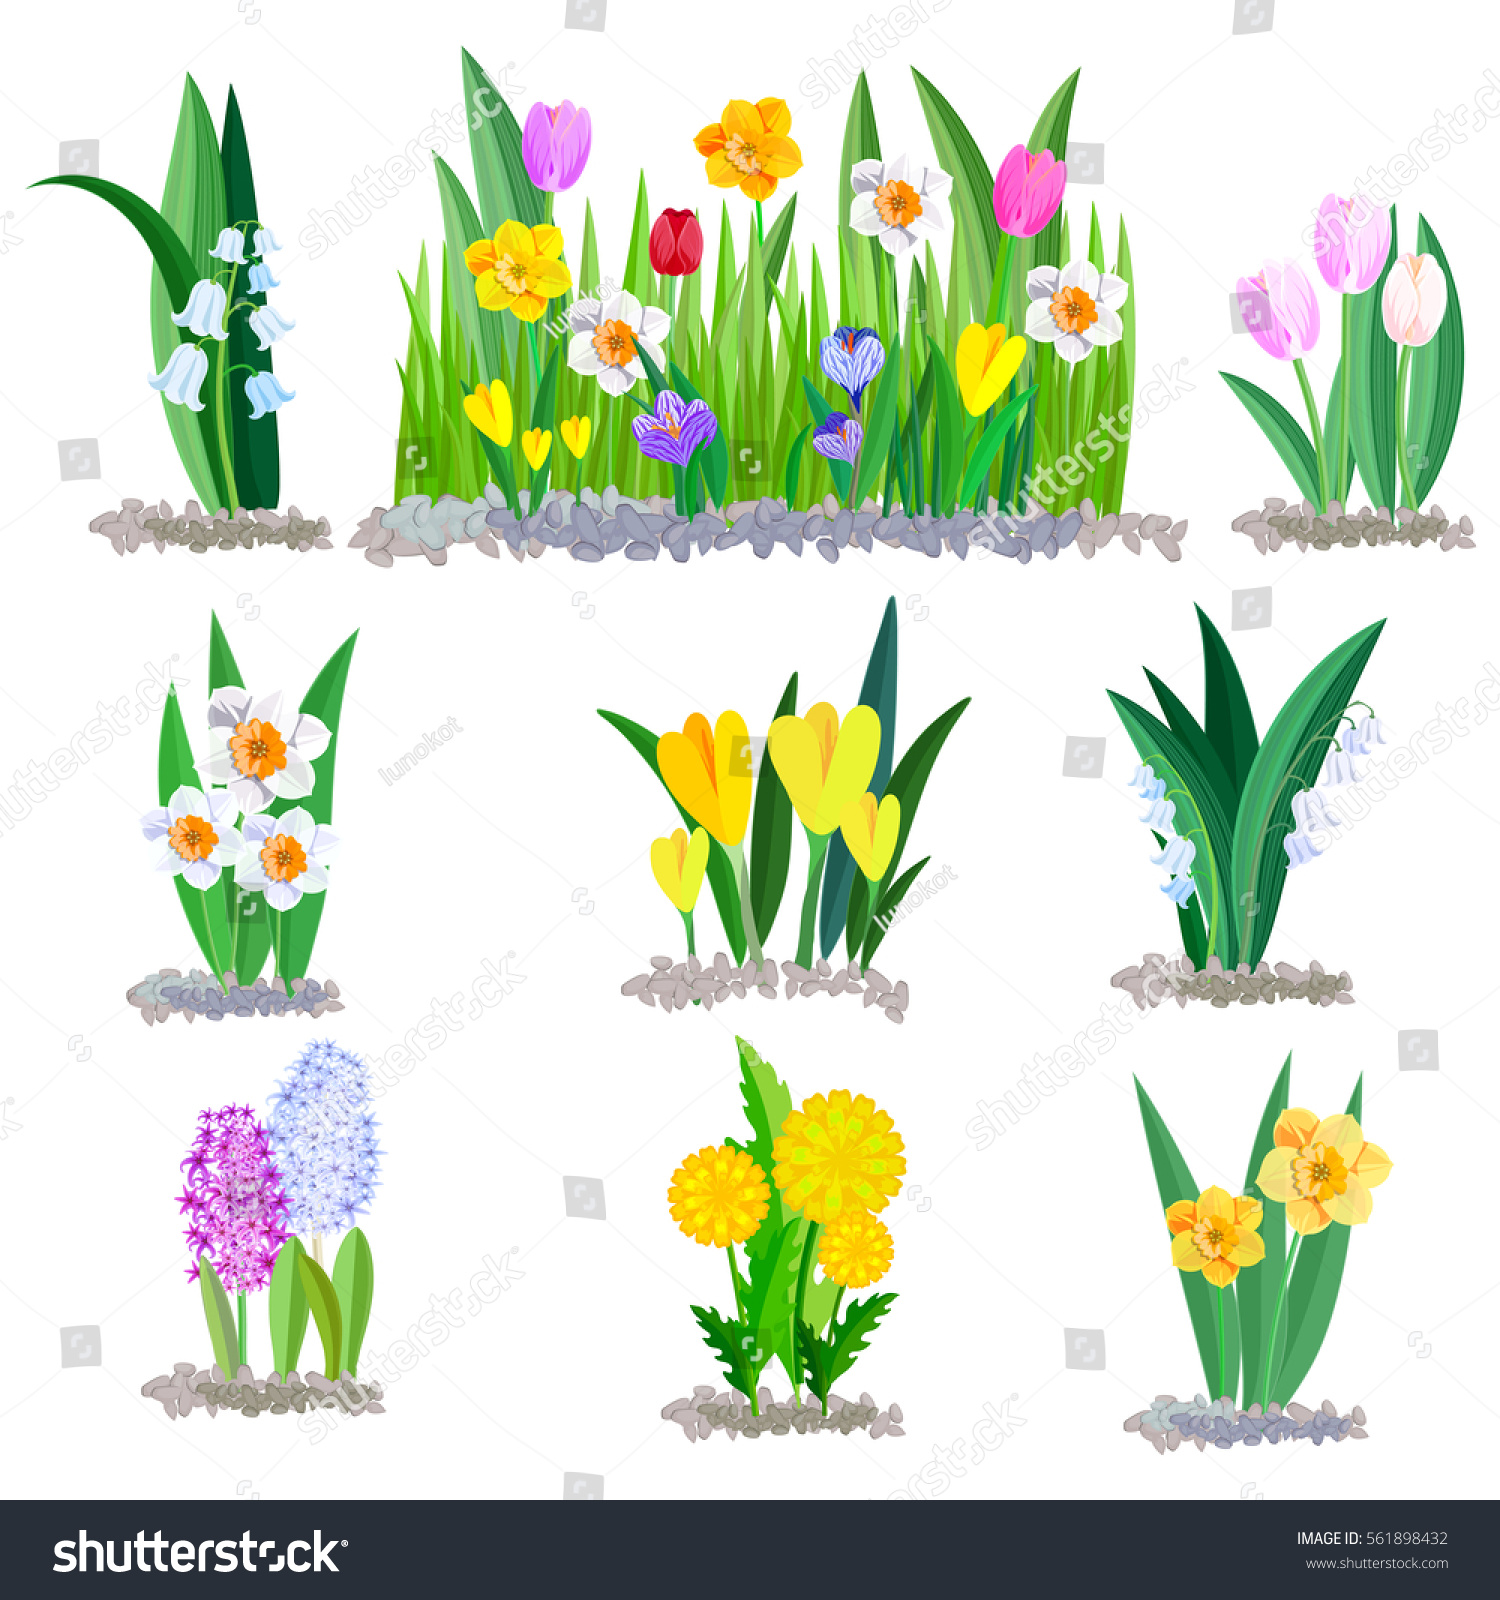 Spring Flowers Growing Garden Icons Borders Stock Vector (2018 ...